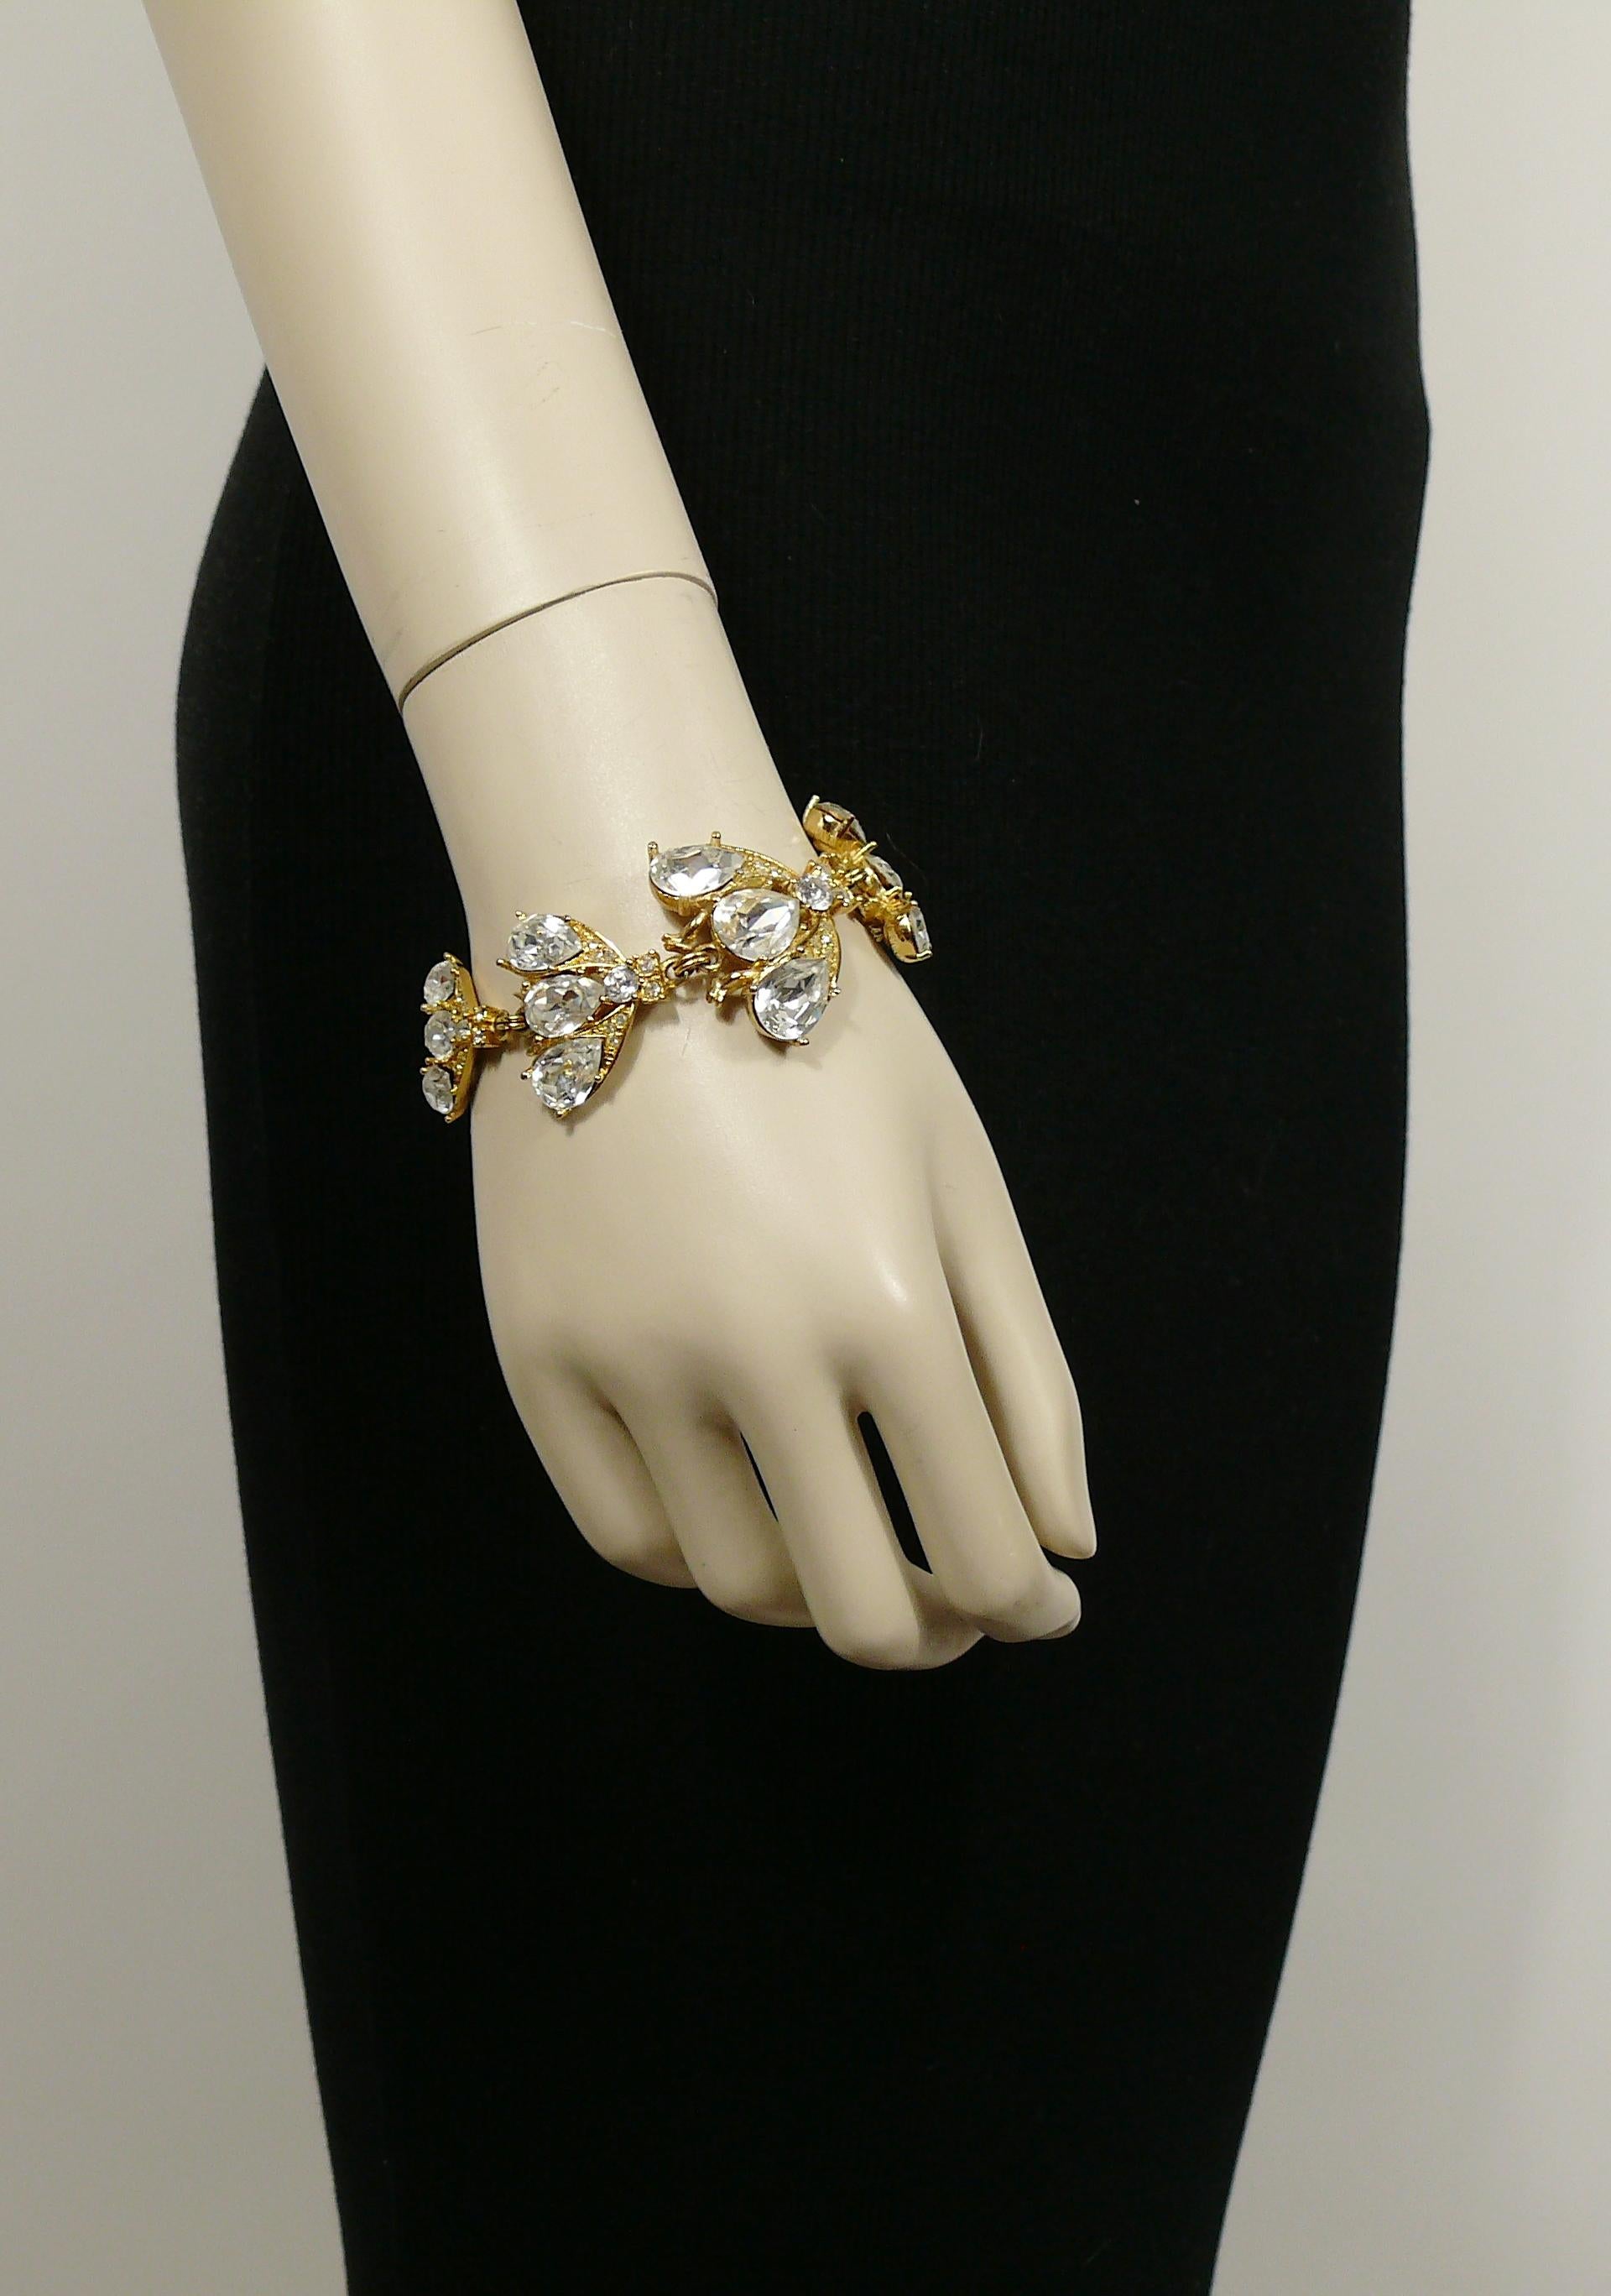 CHRISTIAN DIOR Boutique vintage iconic gold toned bracelet featuring jewelled bee links.

T-bar closure.

Marked CHRISTIAN DIOR Boutique ©.
Embossed CHR. DIOR.

Indicative measurements : length approx. 20 cm (7.87 inches) / max. width approx. 3.3 cm